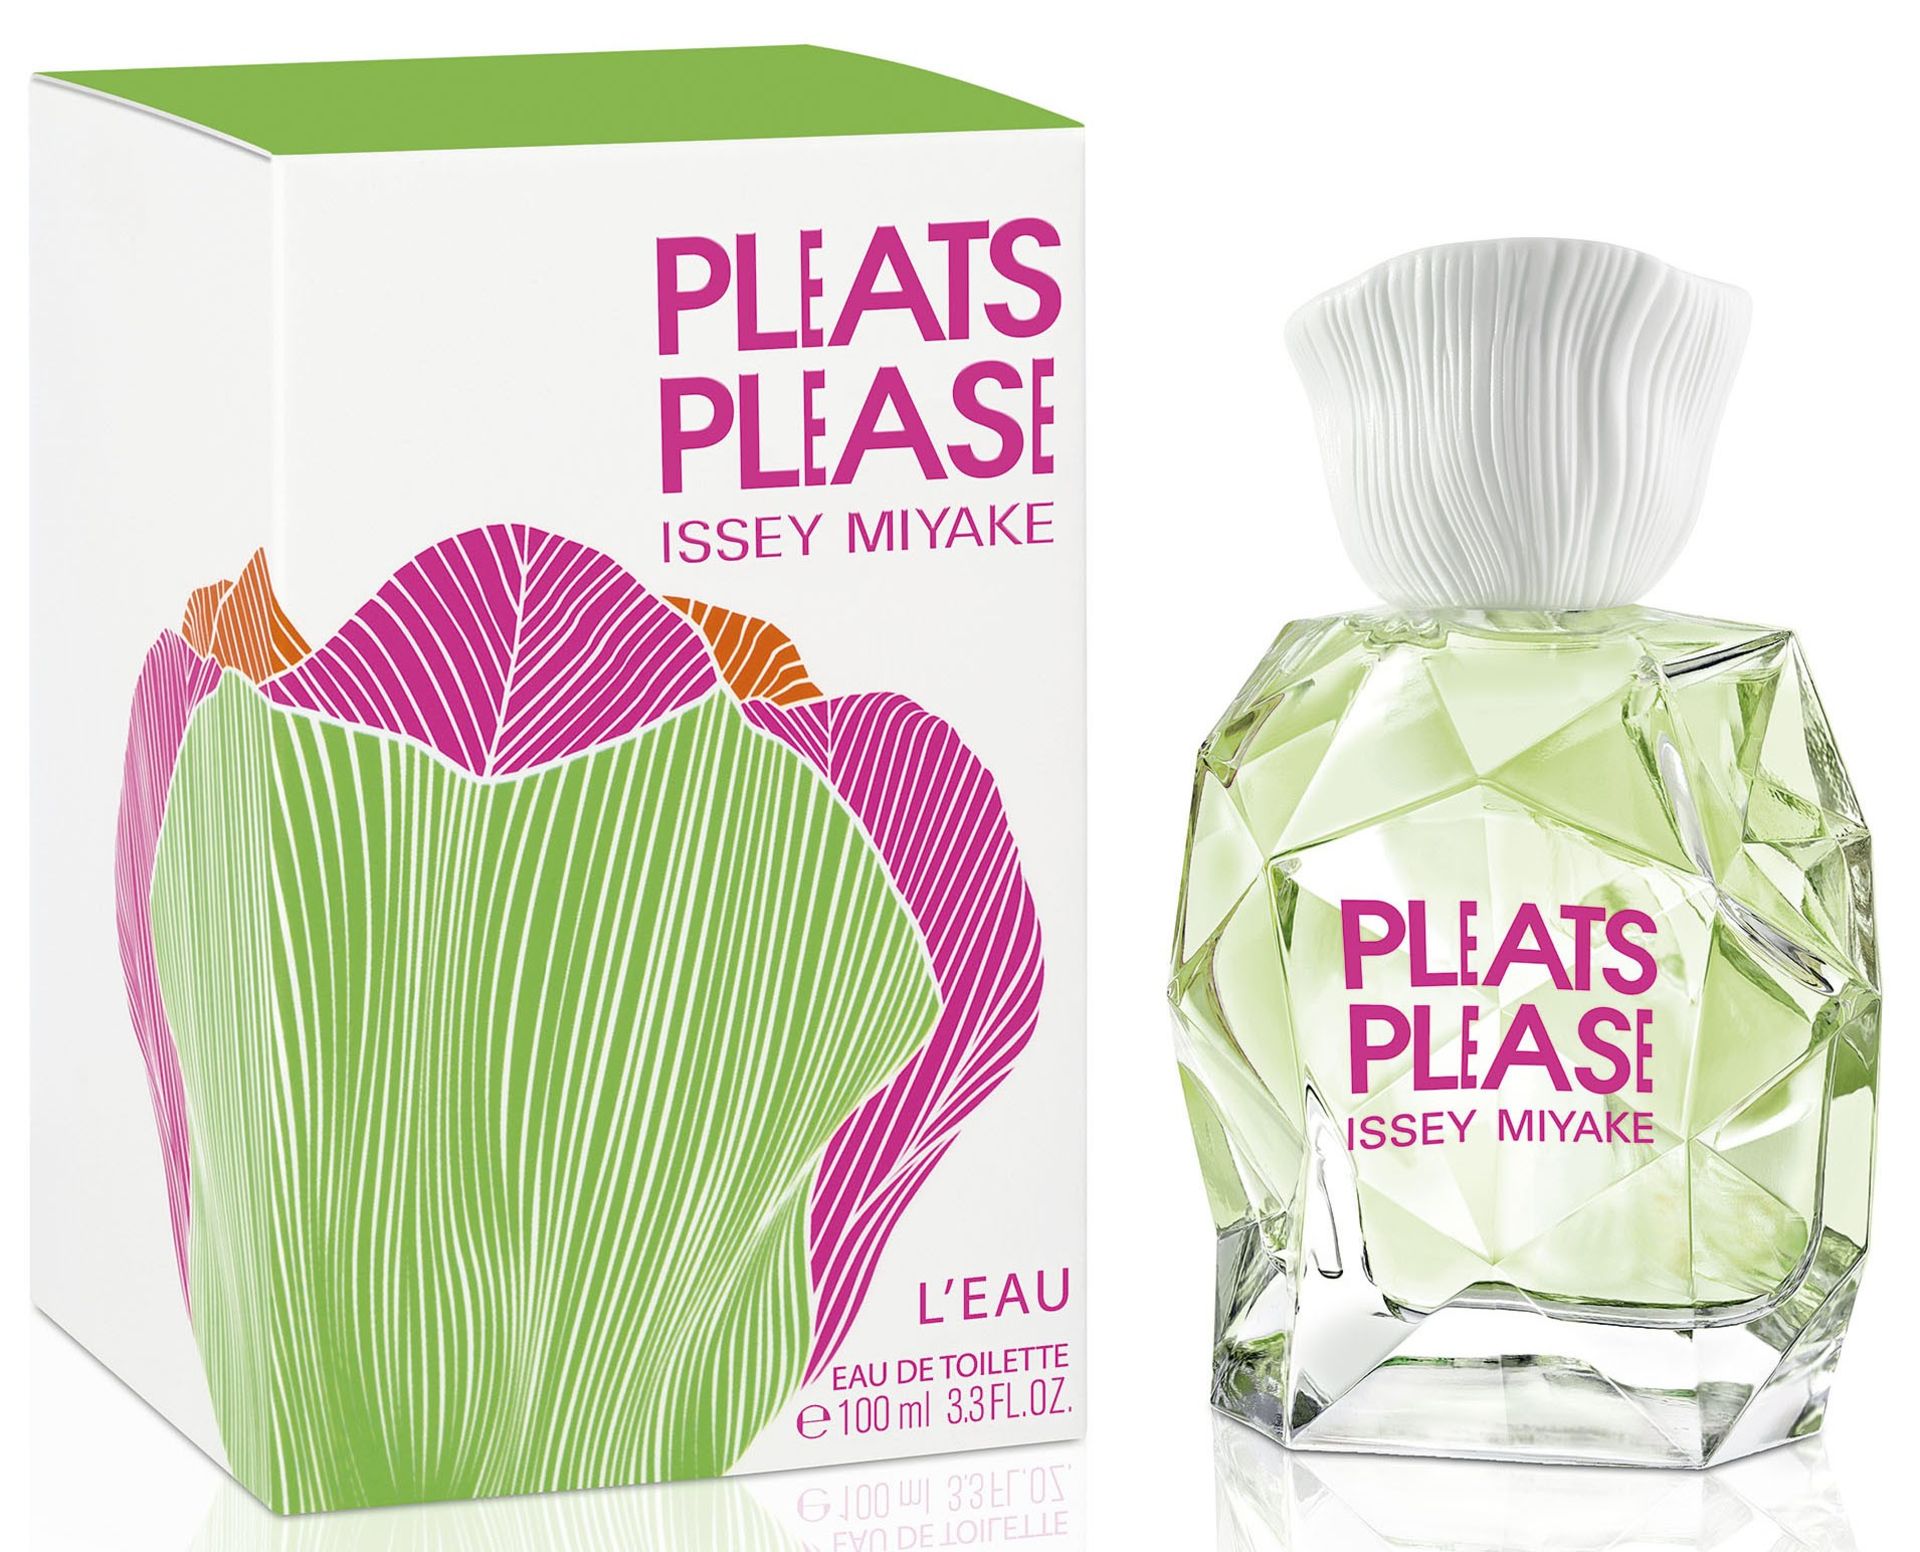 V Brand New Issey Miyake Pleaes Please L'Eau EDT Spray 100ml X 2 YOUR BID PRICE TO BE MULTIPLIED